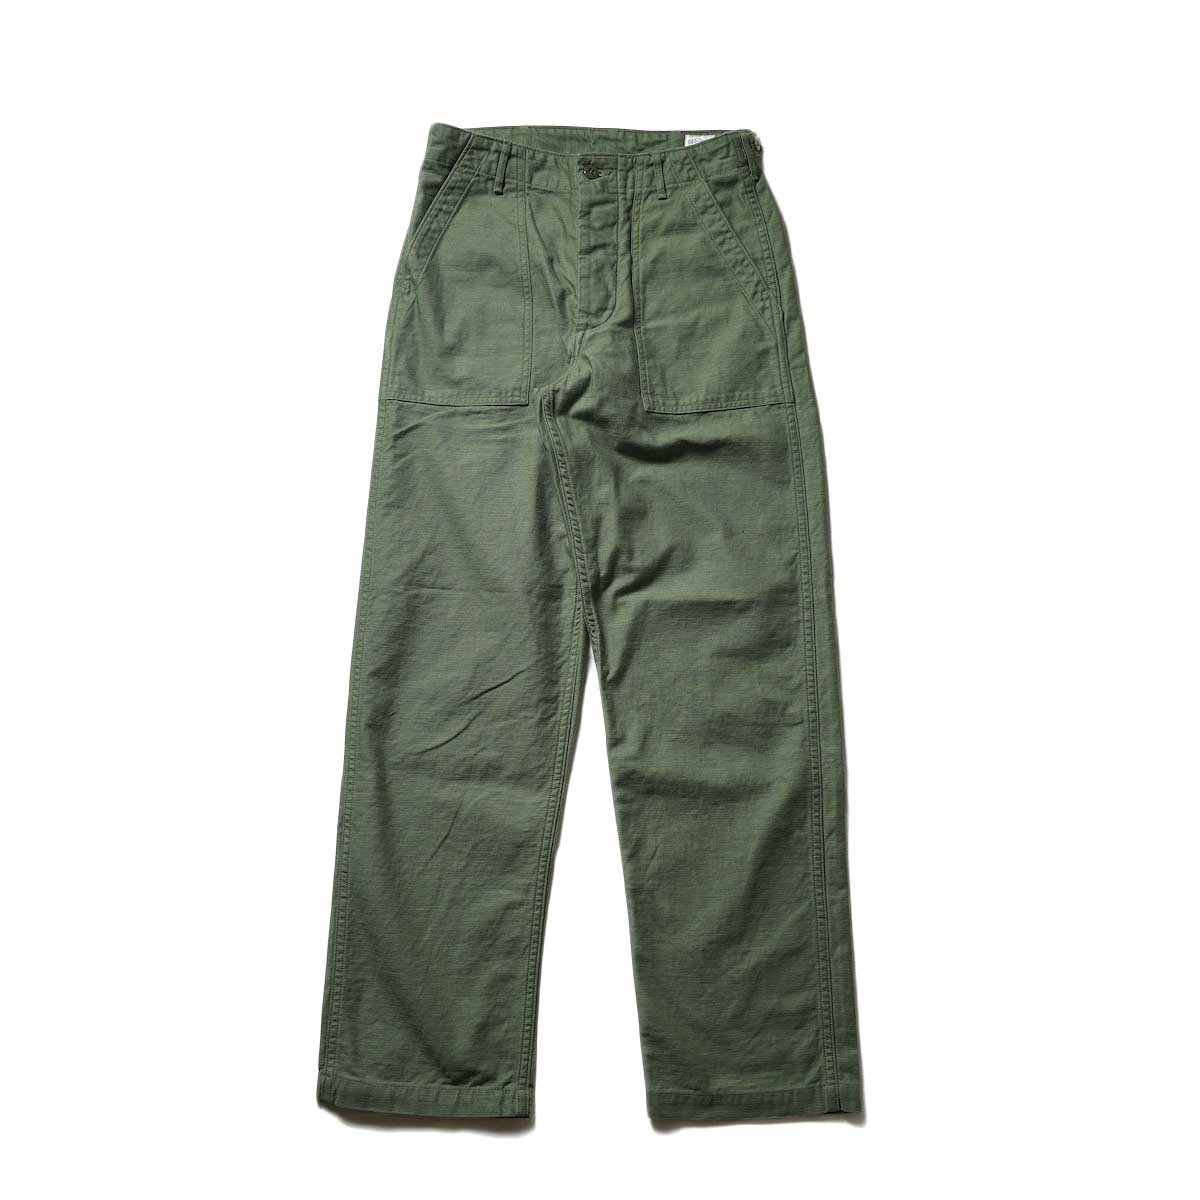 orSlow / US ARMY FATIGUE PANTS (GREEN)